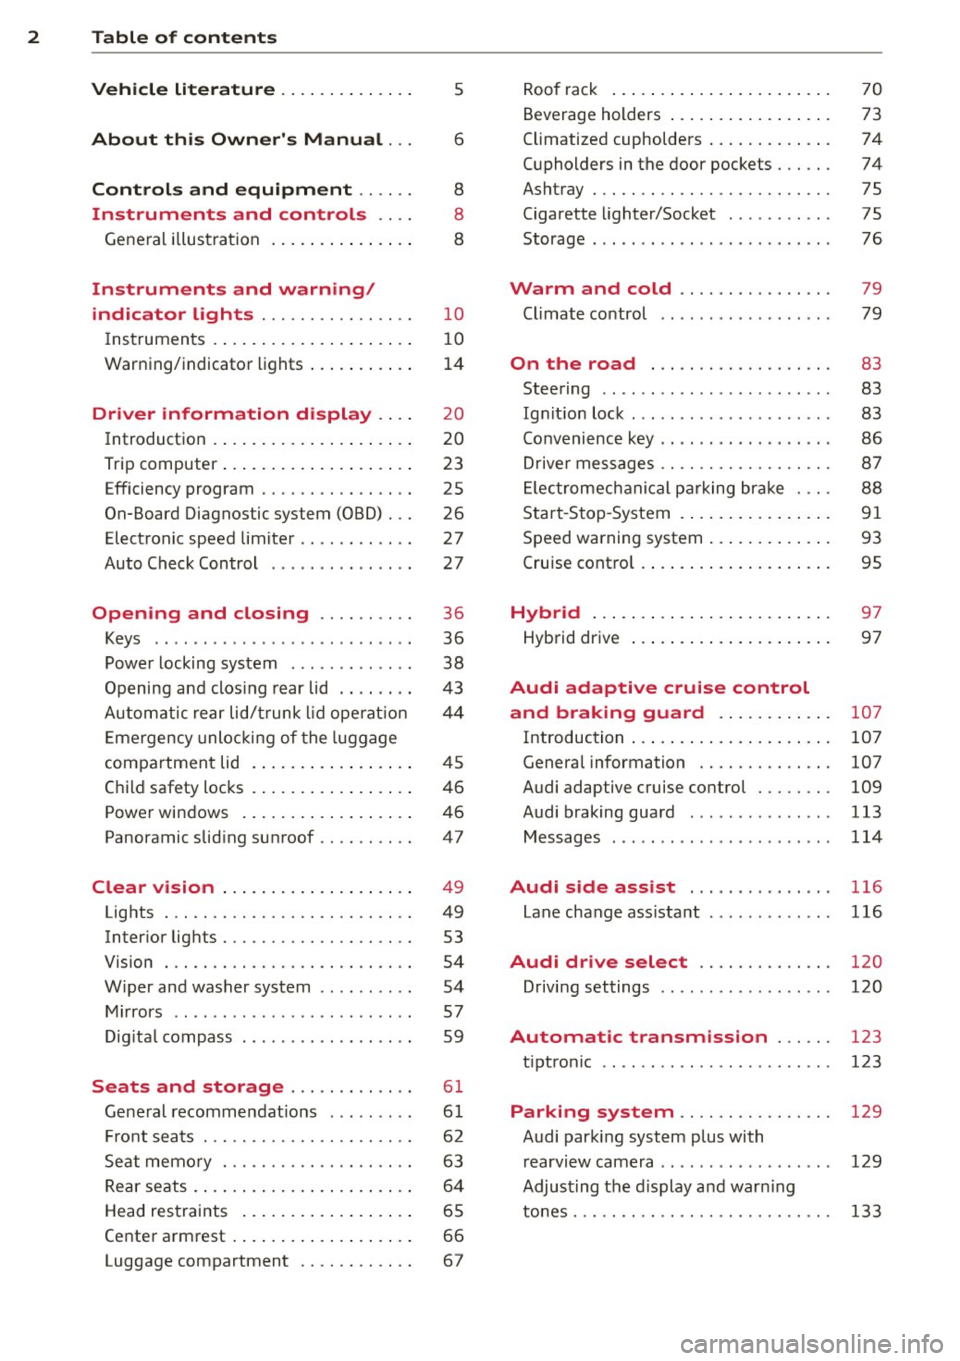 AUDI Q5 2014  Owners Manual 2  Table  of  contents Vehicle  literature  .. .. .. .. .. ... . 
About  this  Owners  Manual  ... 
Controls  and  equipment  .. ...  . 
Ins truments  and  controls  .. . . 
General  illus tration  .